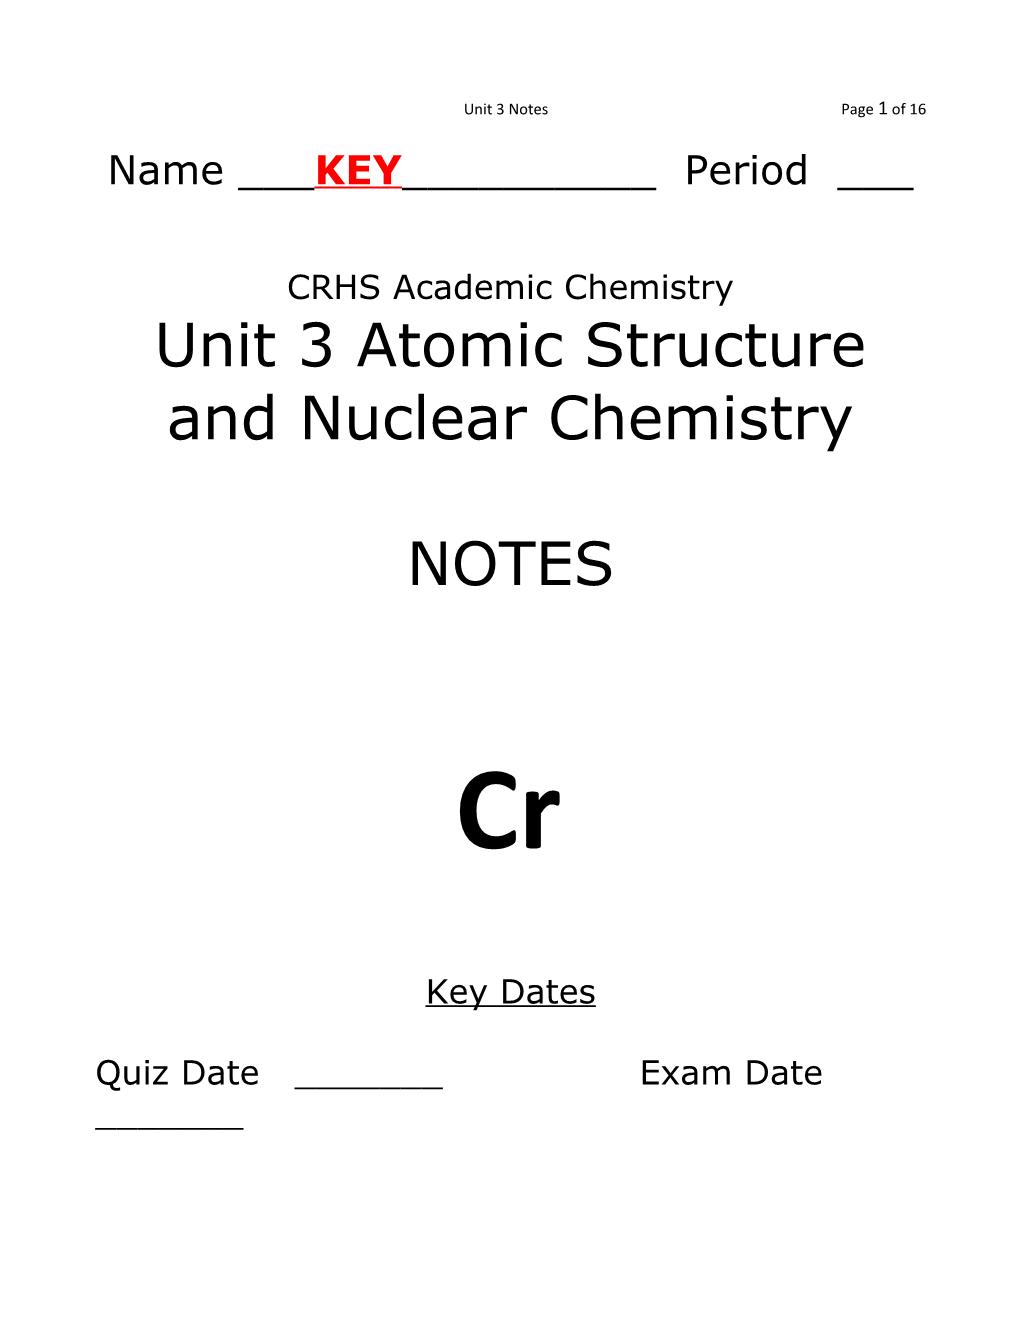 Unit 3 Atomic Structure and Nuclear Chemistry